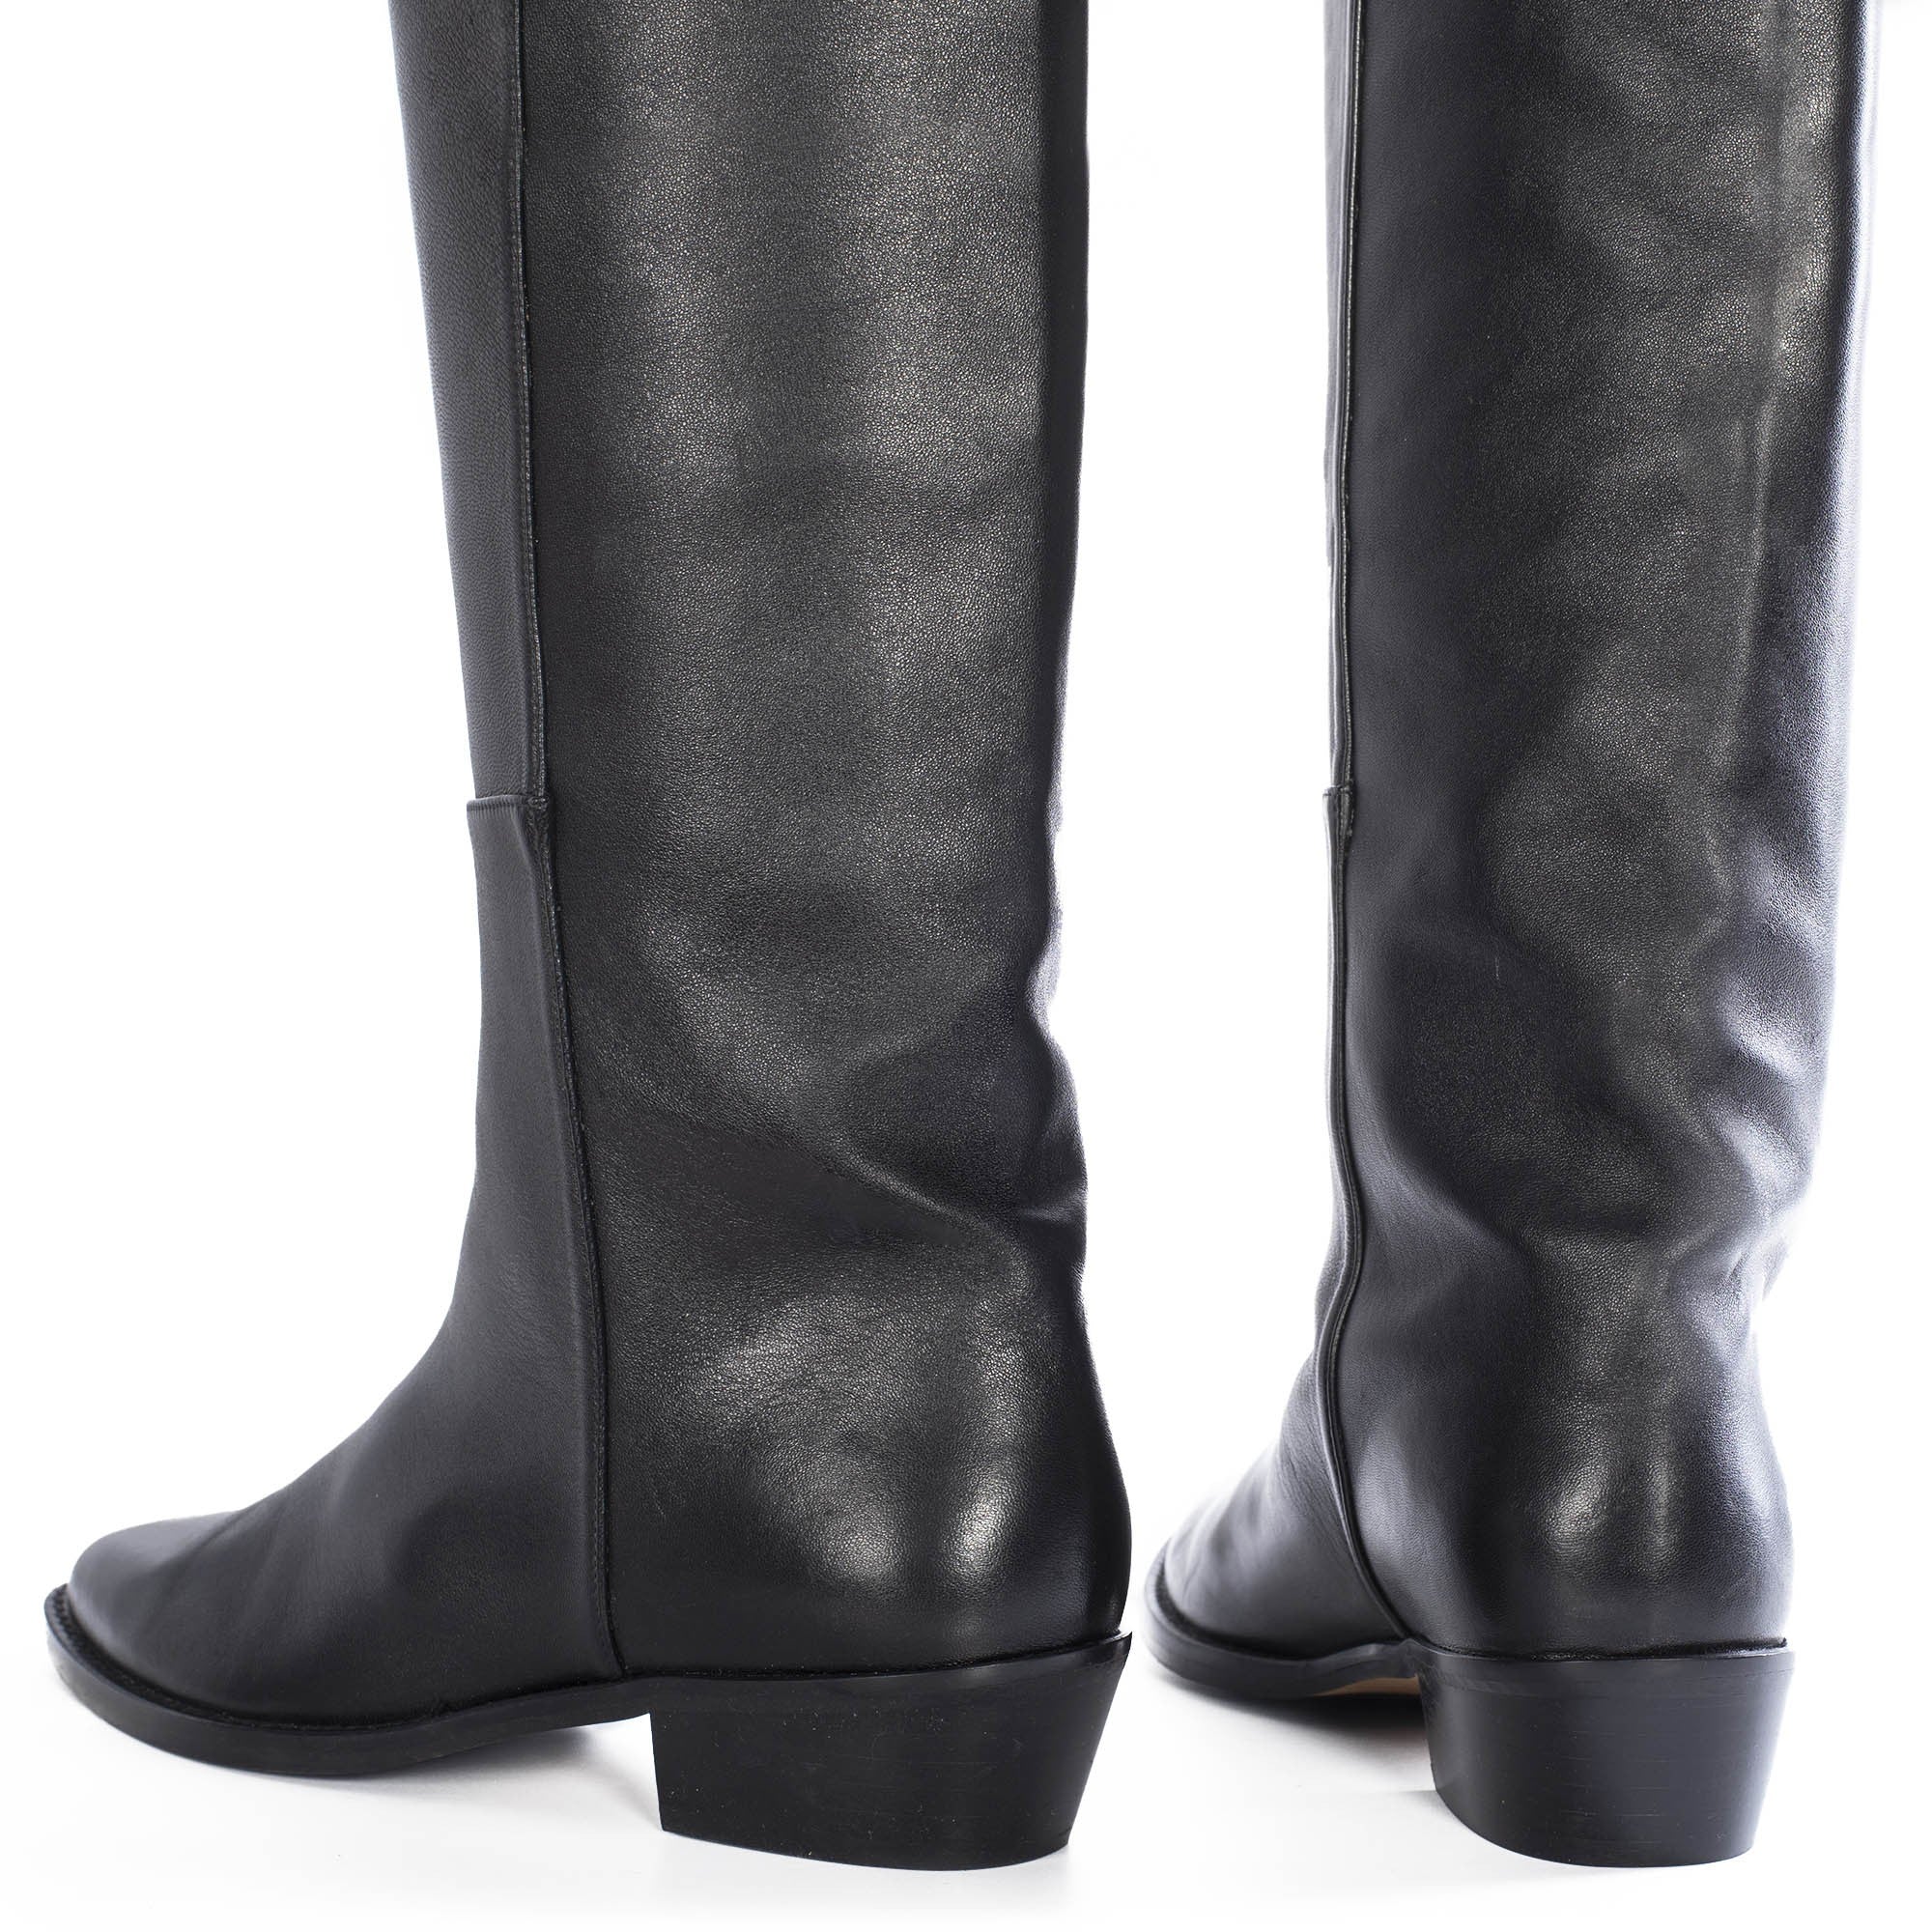 TORAL BLACK LEATHER KNEE-HIGH BOOTS